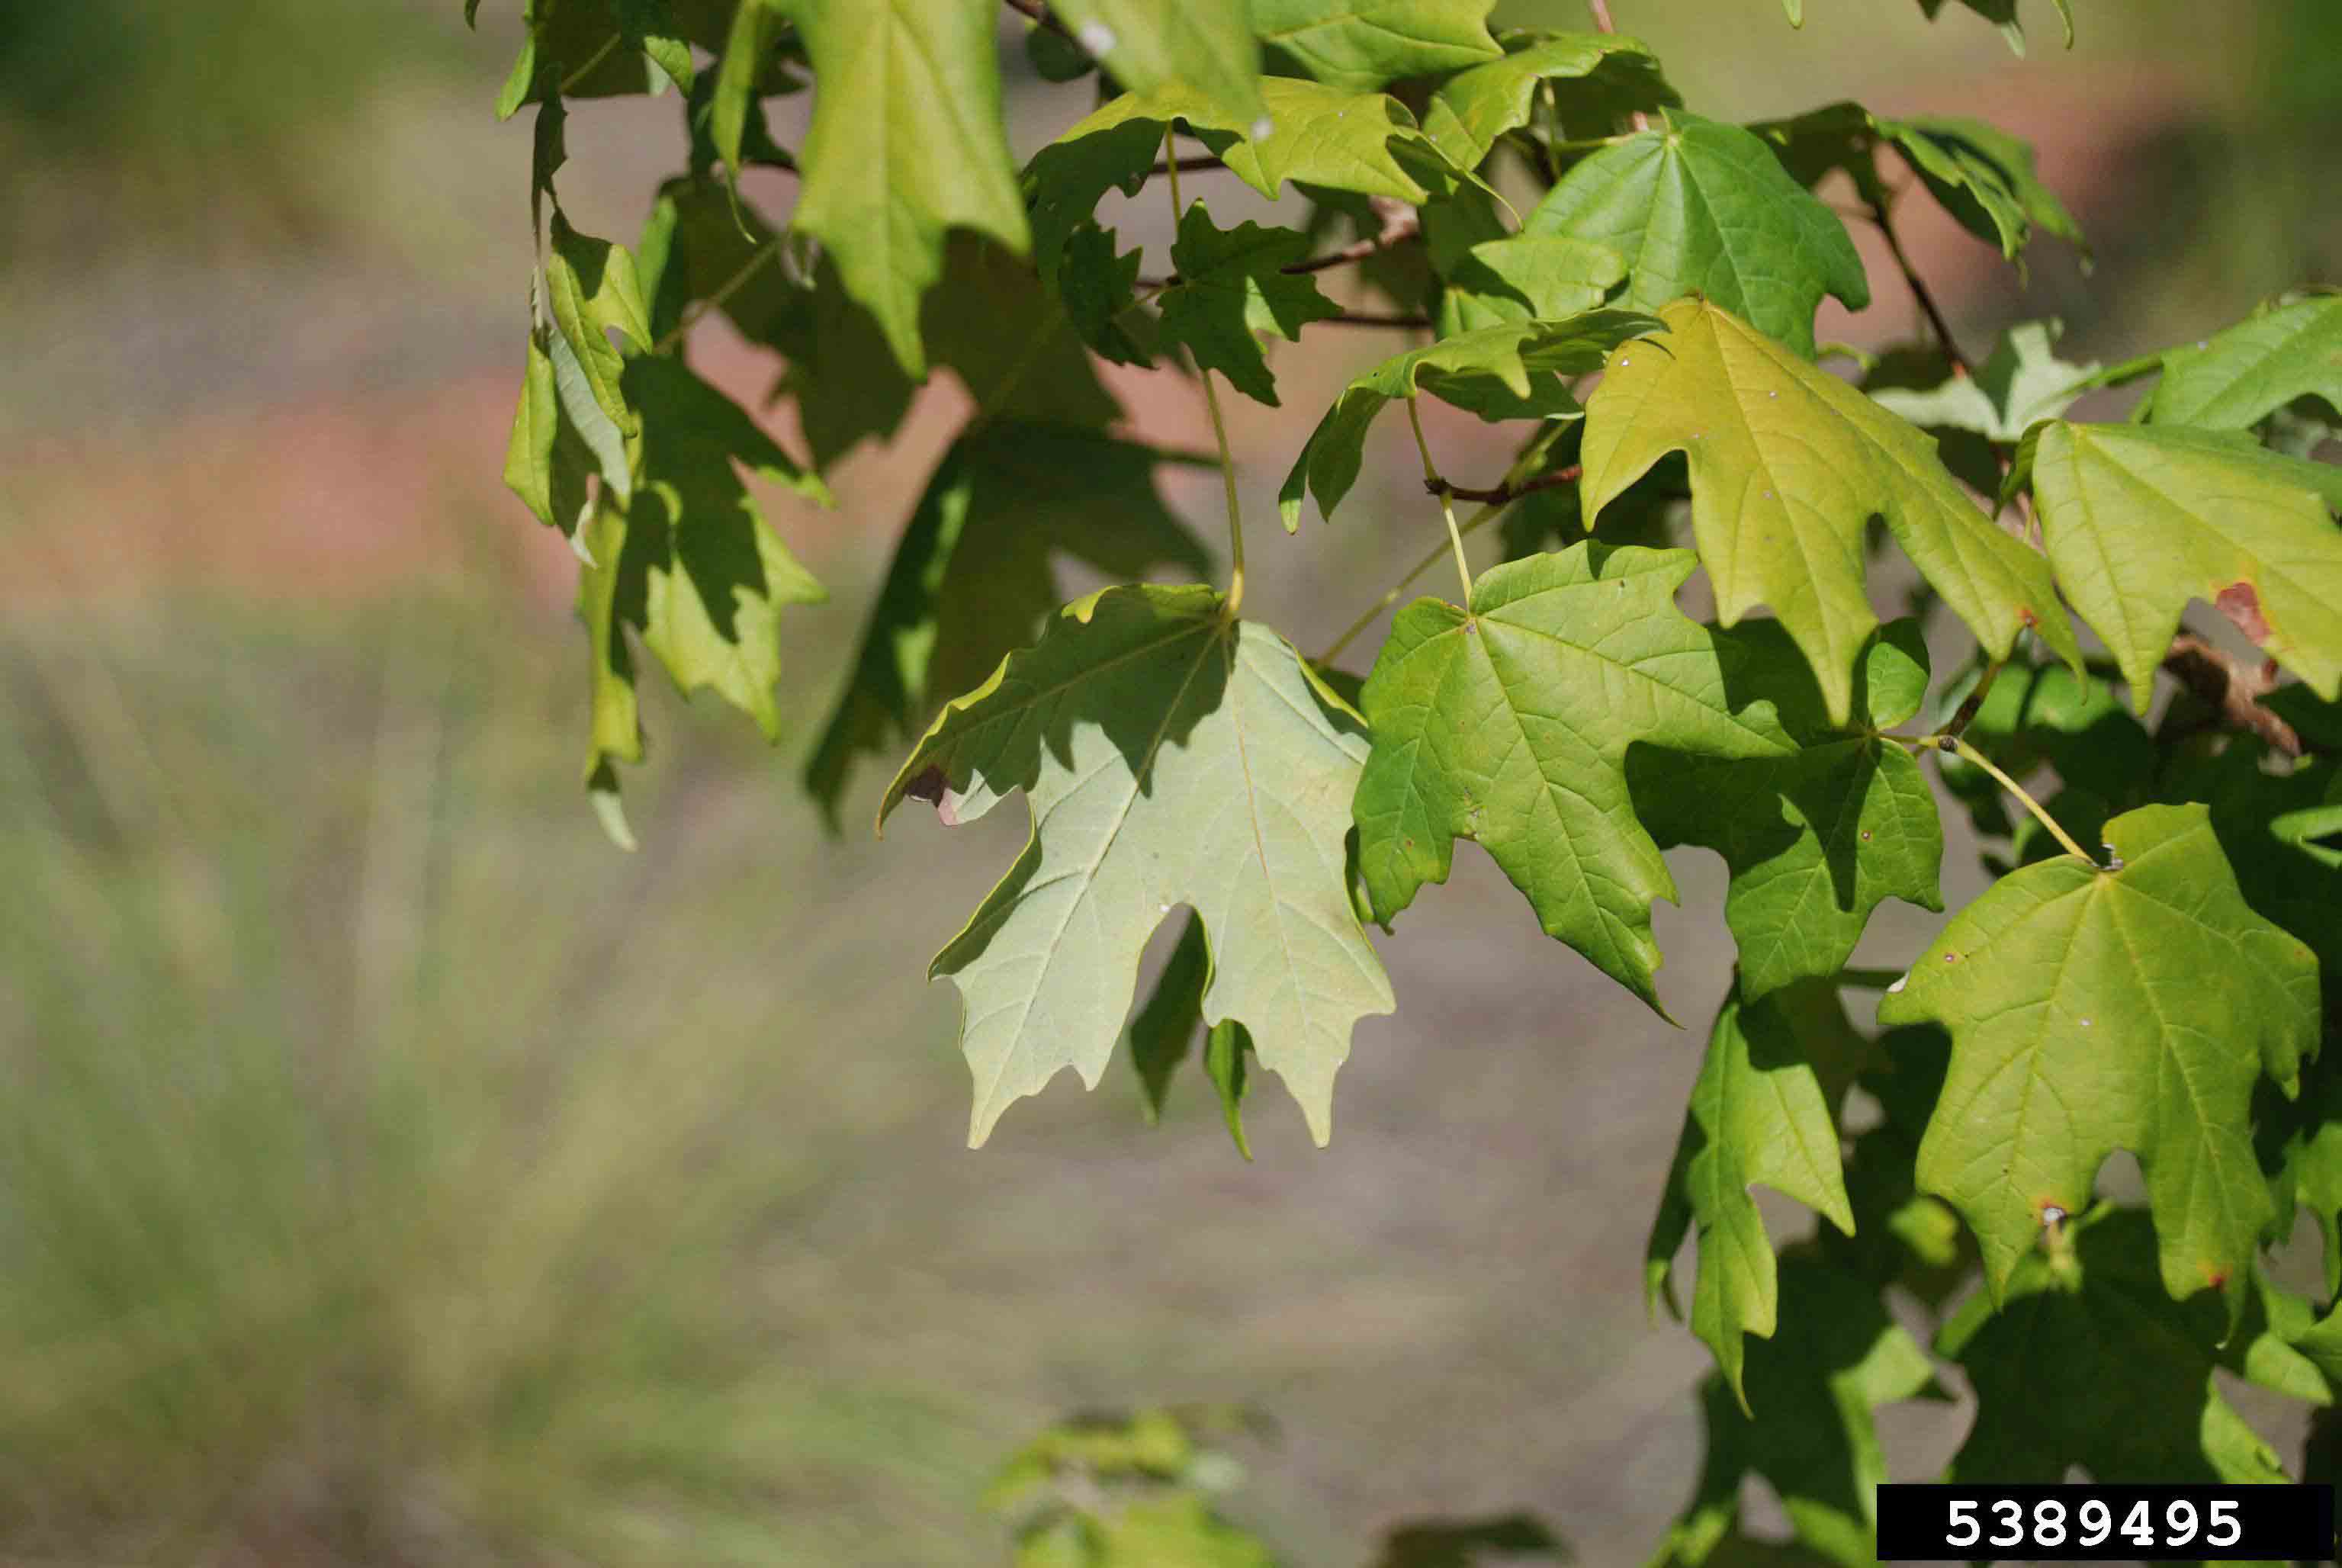 Southern sugar maple leaves